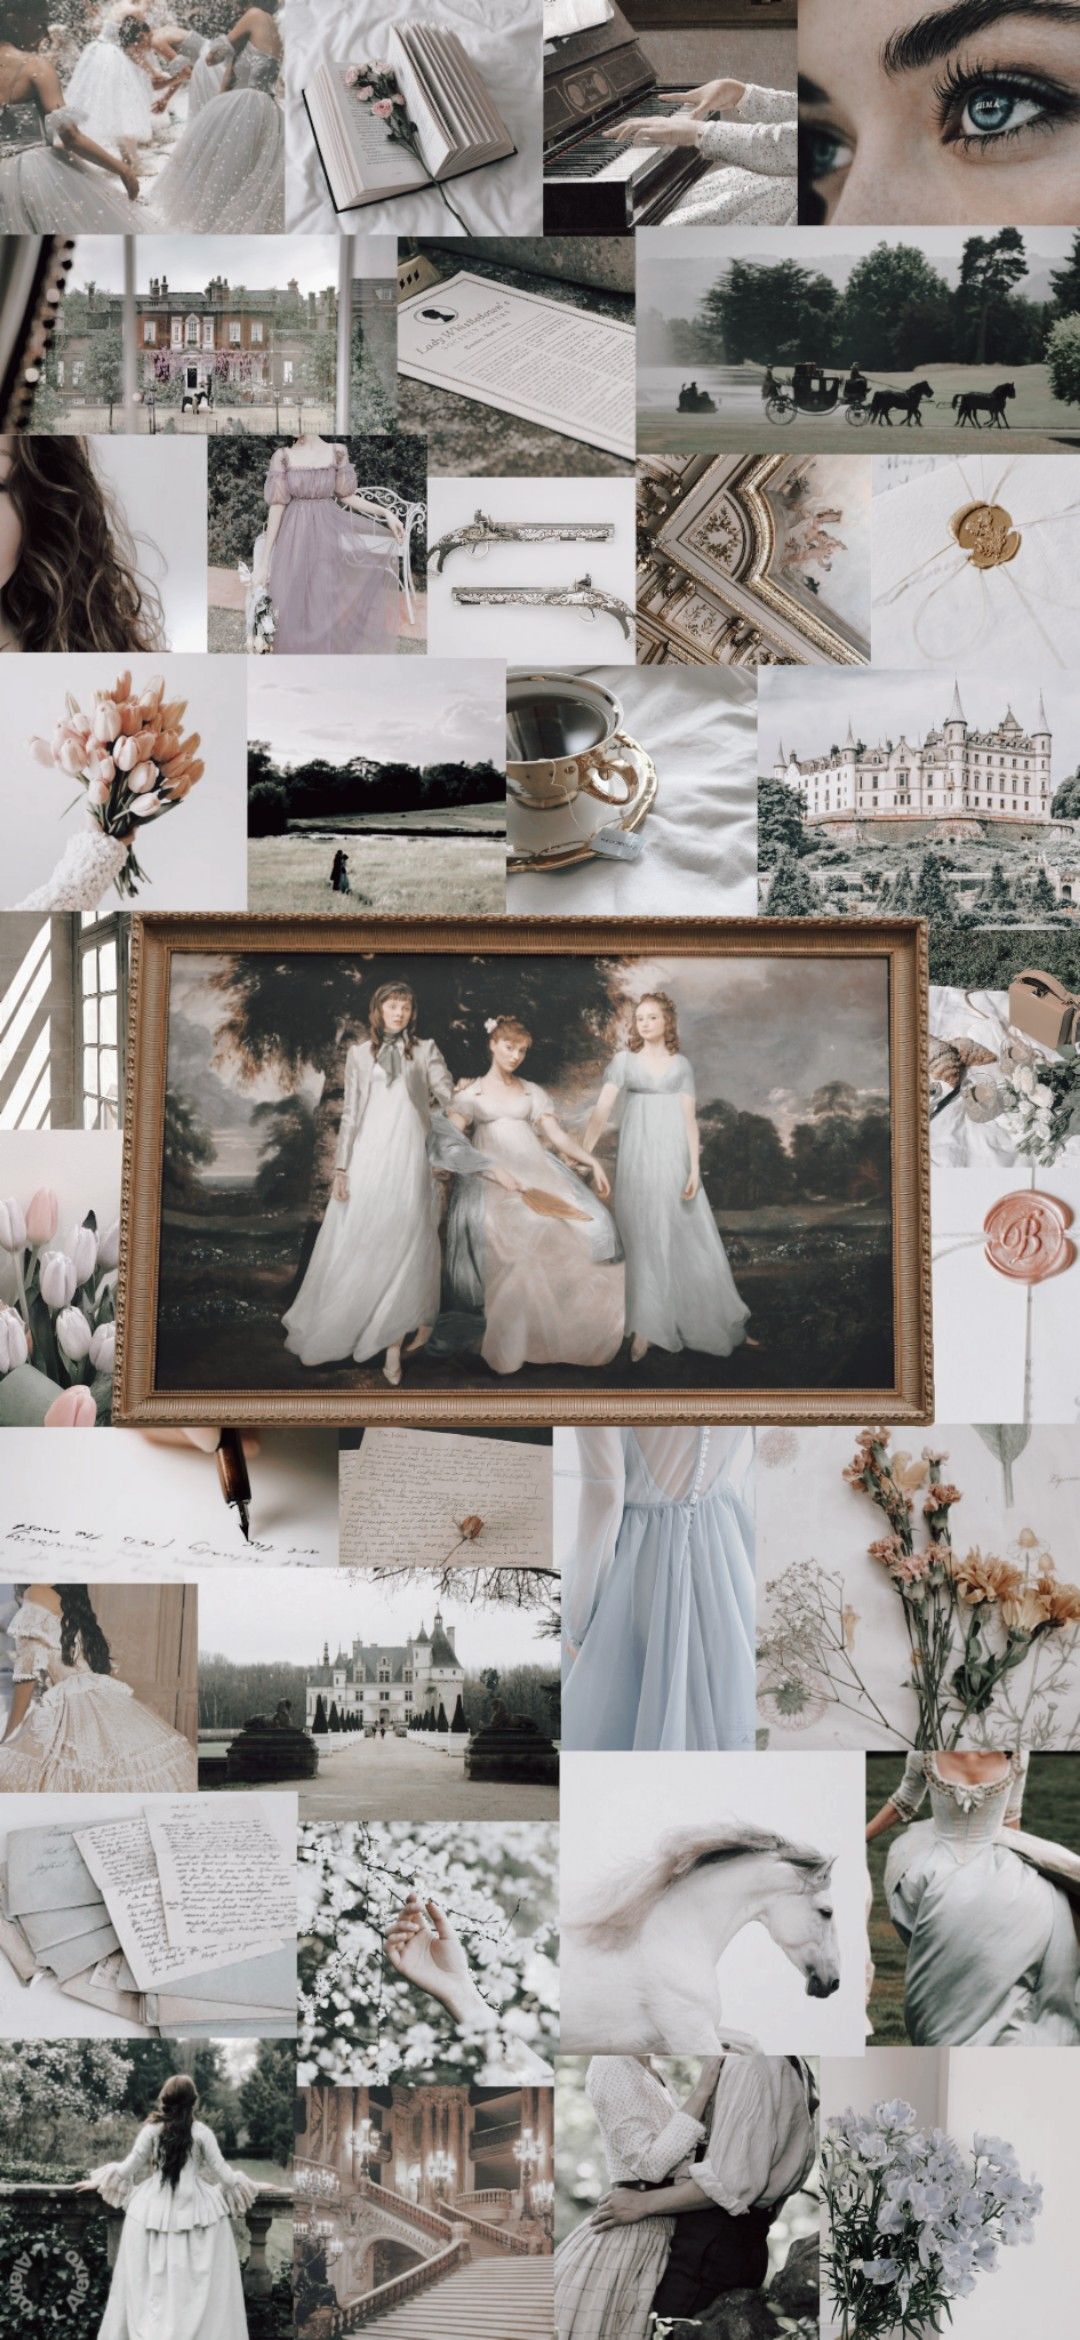 Aesthetic collage of art, fashion, and nature photos in a vintage style - Bridgerton, wedding